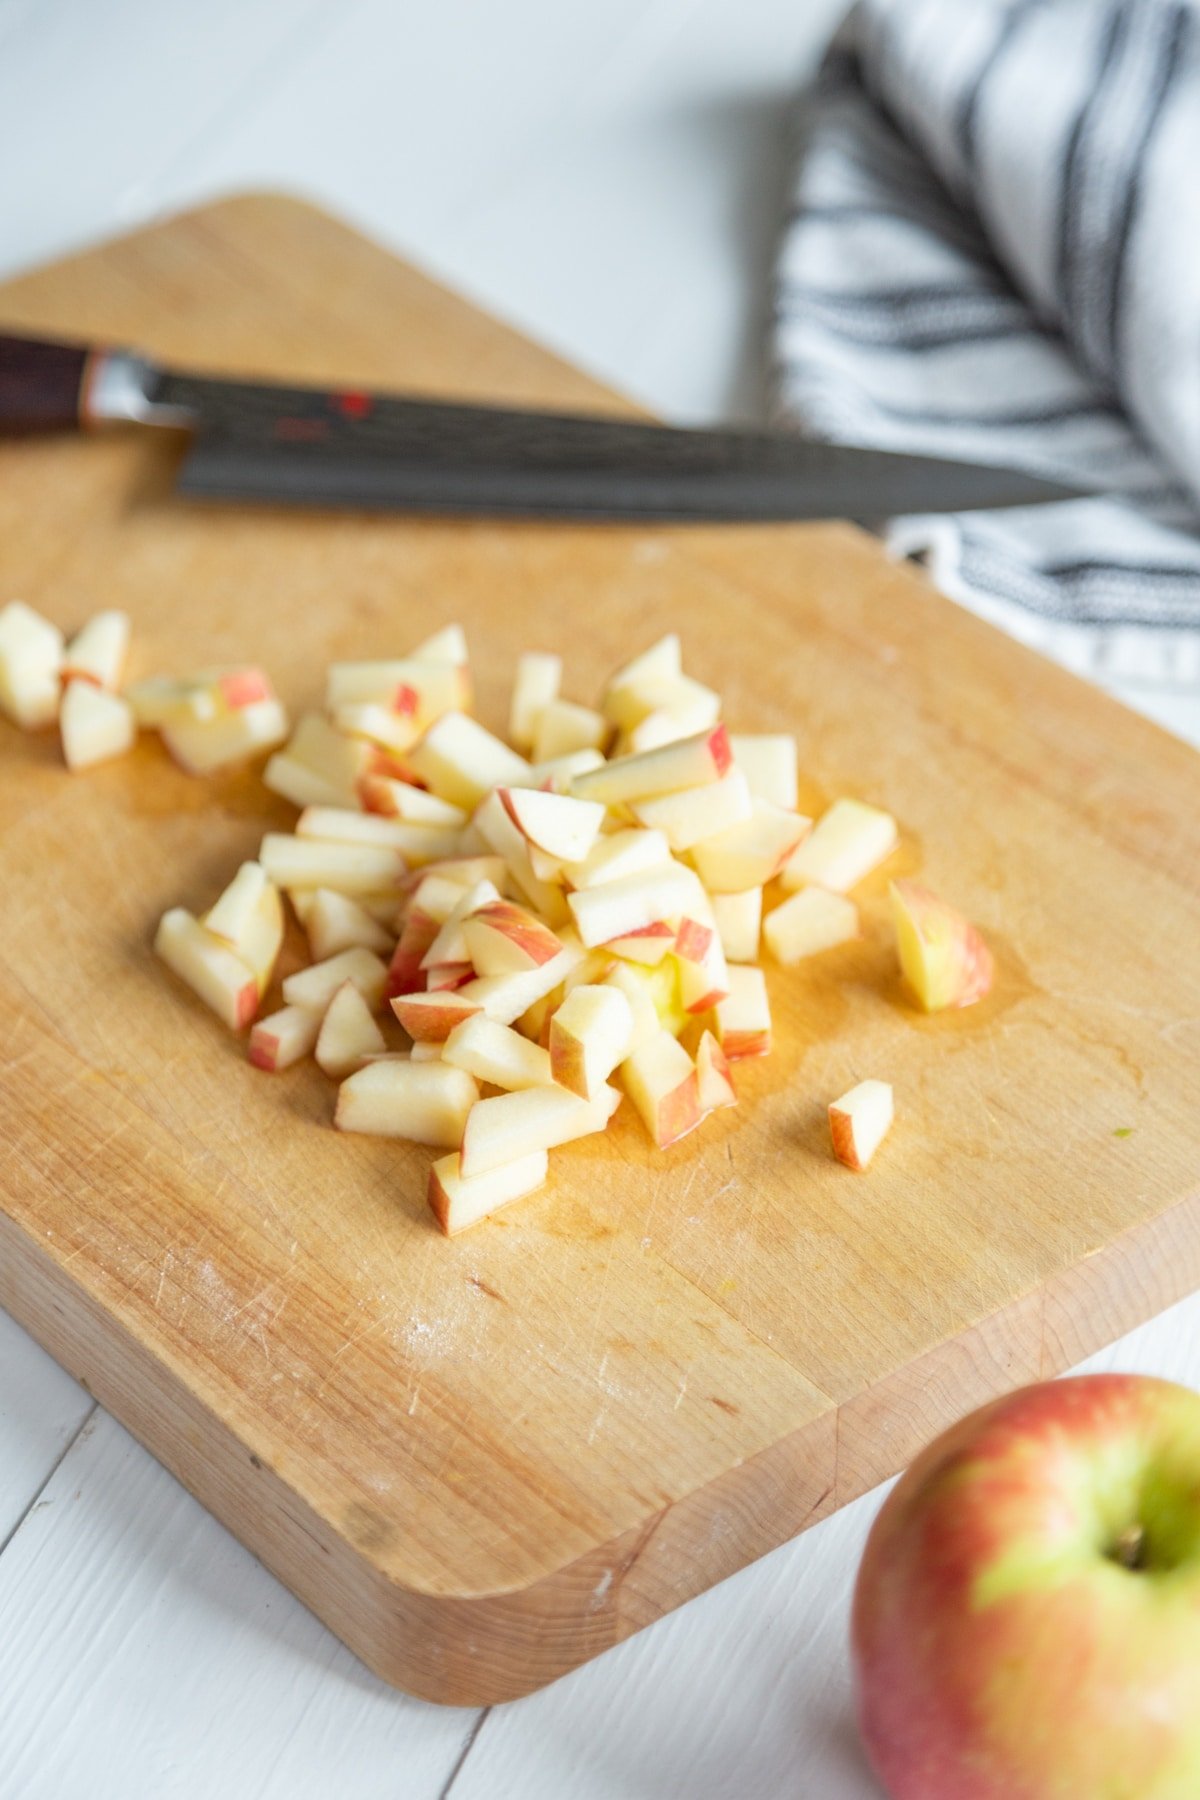 A wood cutting board with a knife and chopped apples and a whole red apple and a towel next to the board.